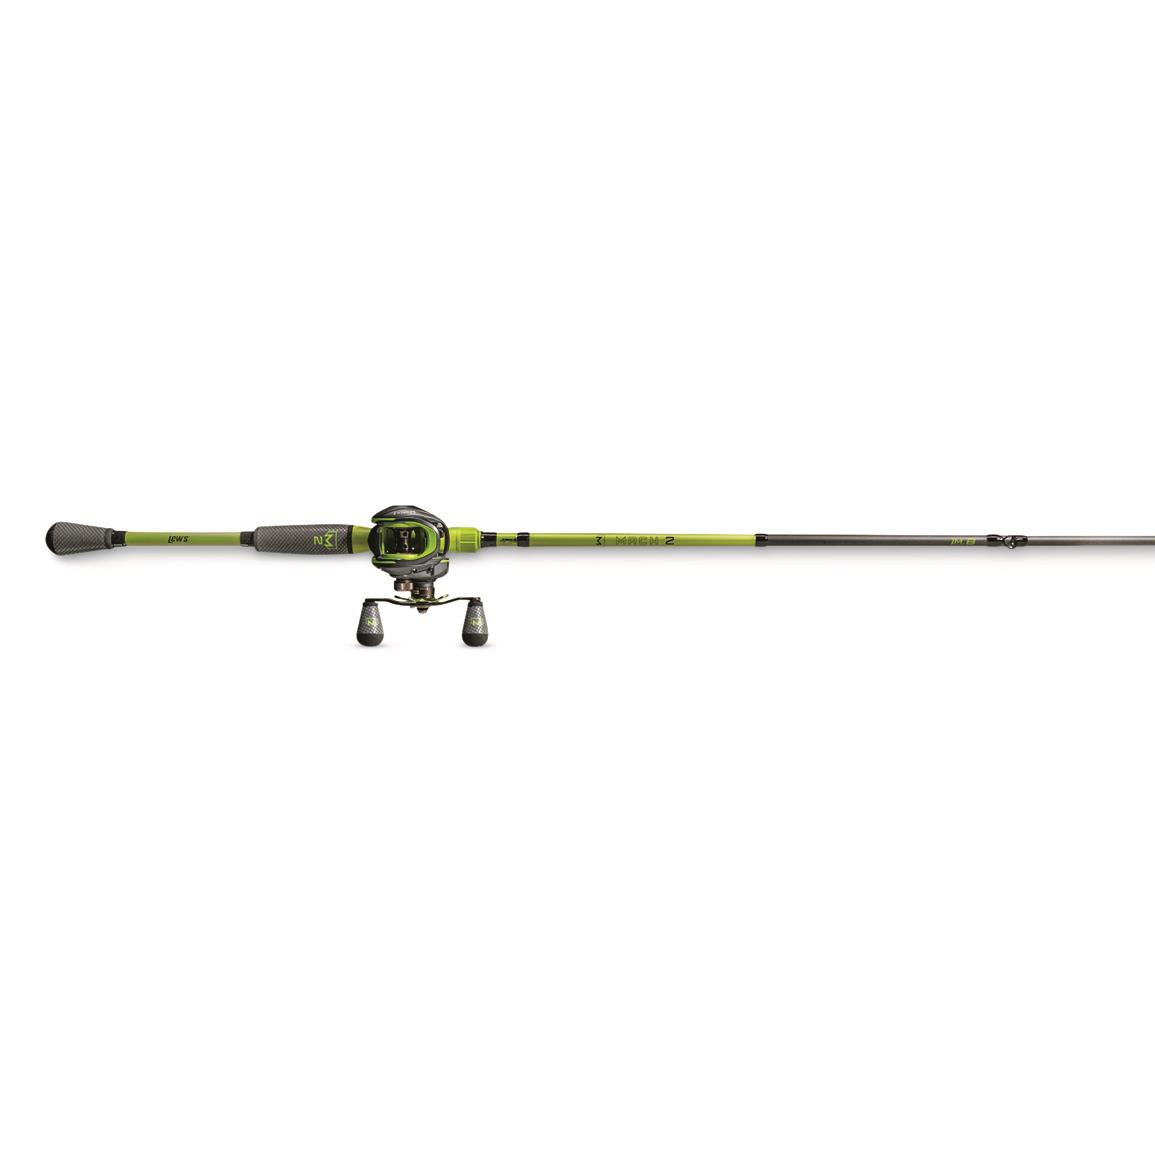 Abu Garcia Max STX Baitcast Combo, 6'6 Length, Medium Power, Fast Action, Right  Hand - 726886, Casting Combos at Sportsman's Guide